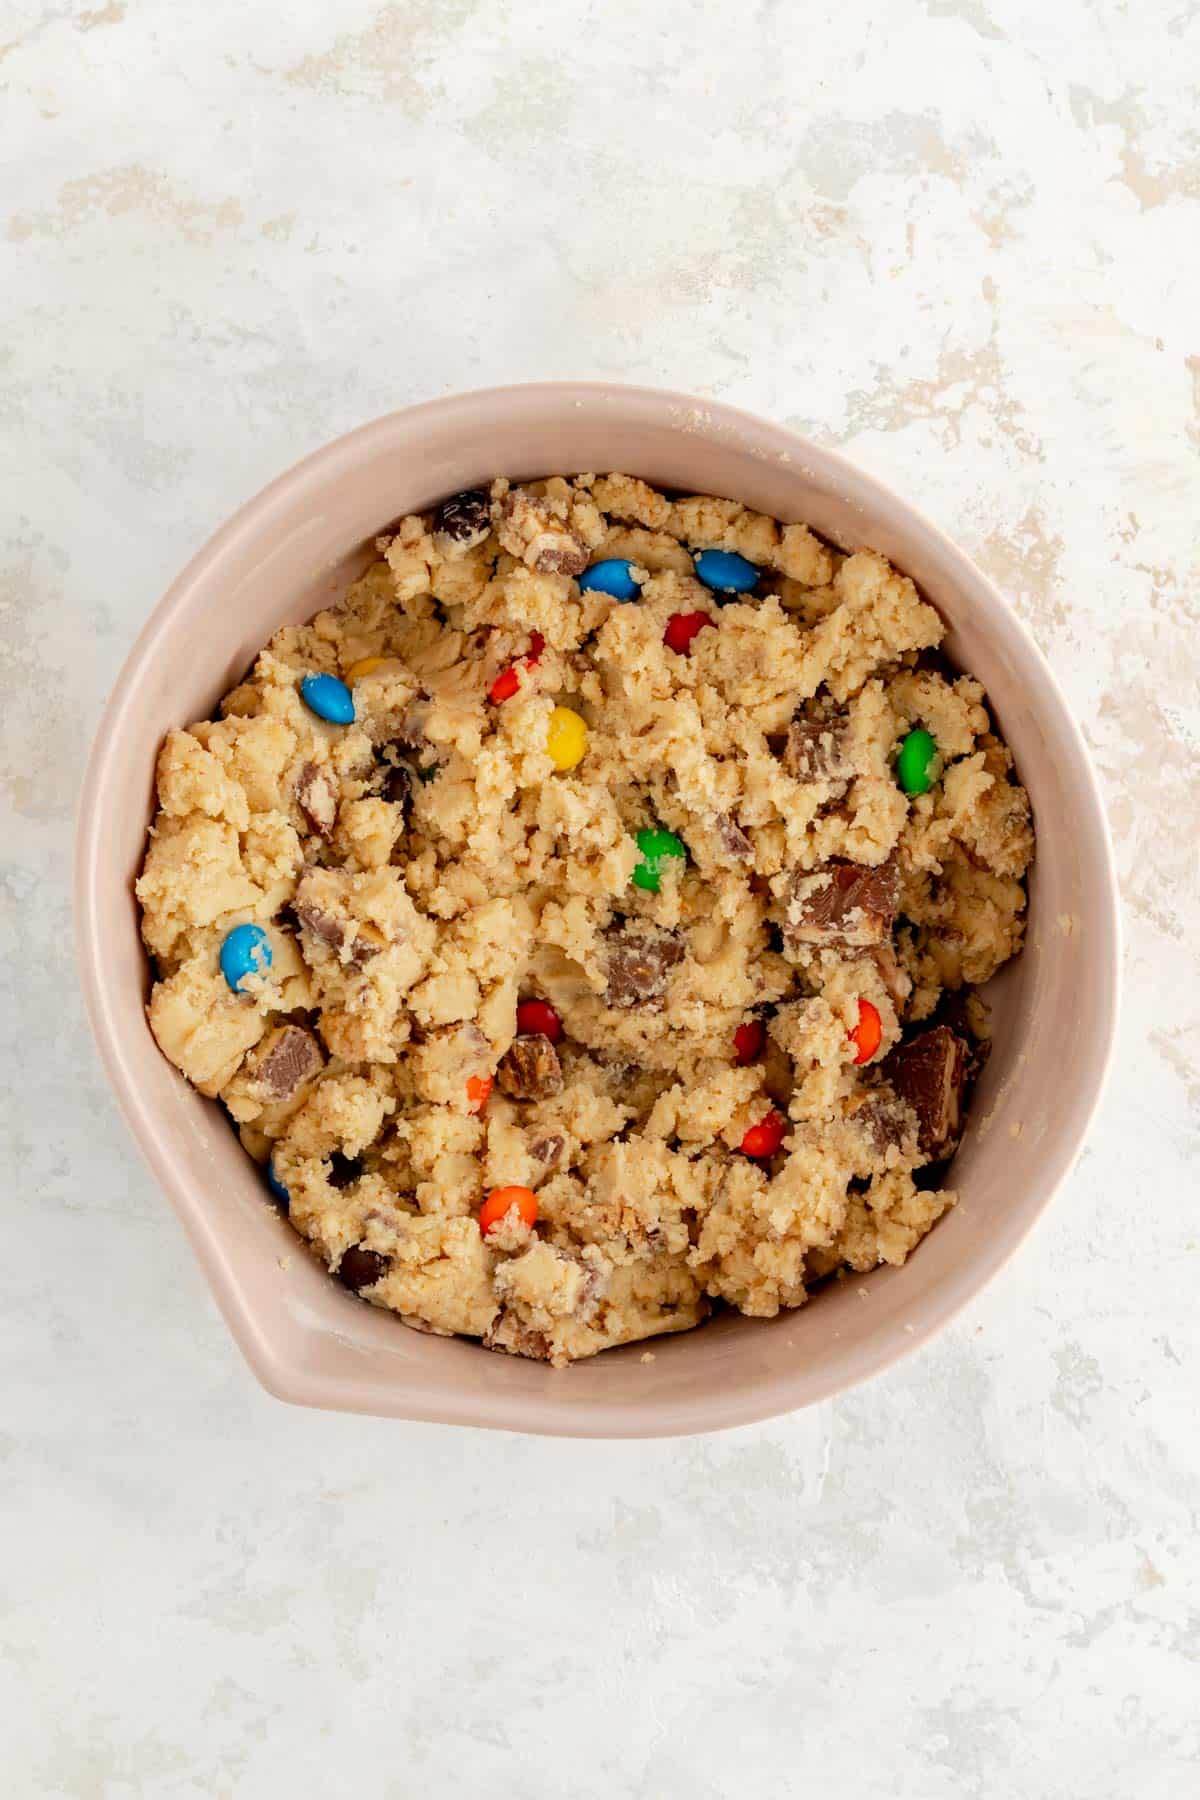 candy bar cookie dough in a tan bowl on white plaster background.